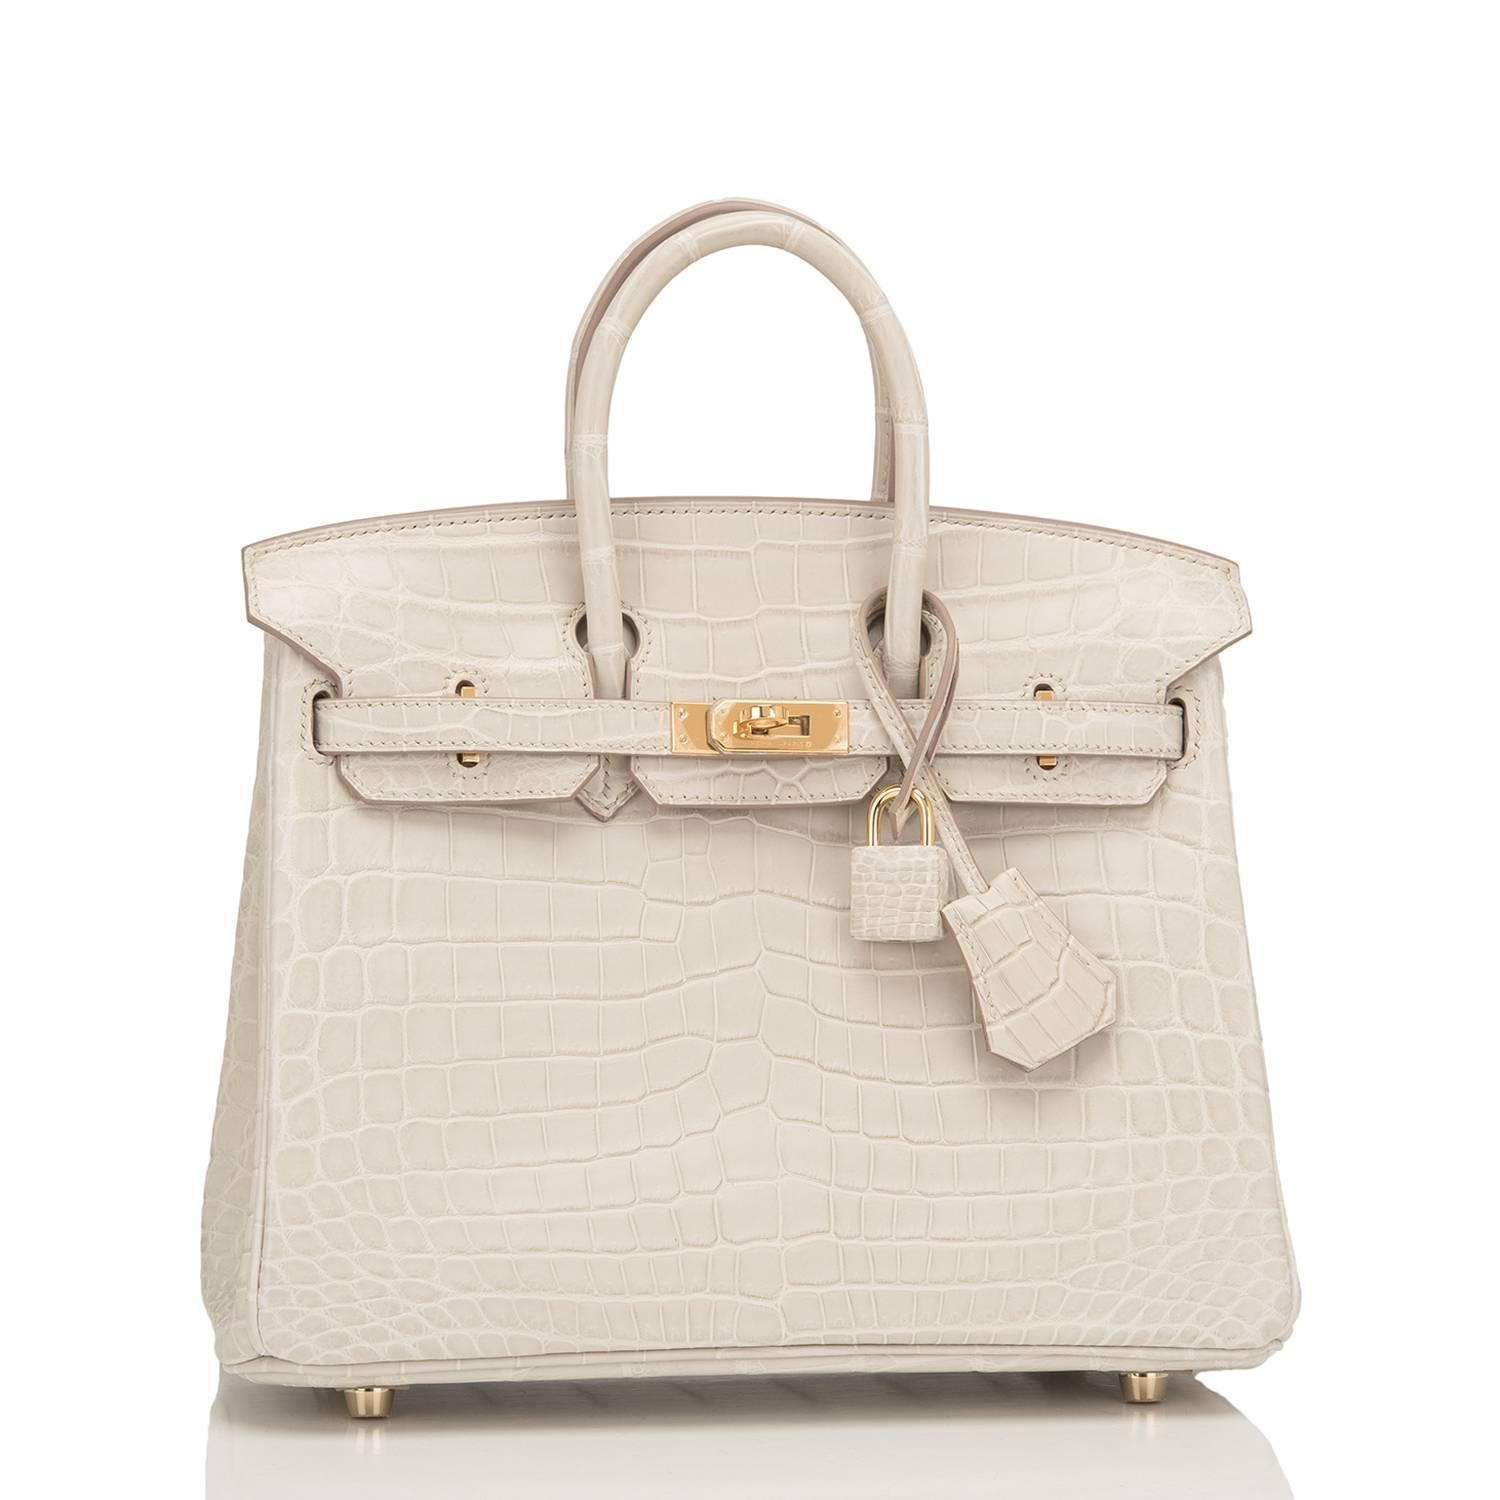 Hermes Beton Birkin 25cm in matte Nilo crocodile with gold hardware.

This Birkin has tonal stitching, a front toggle closure, a clochette with lock and two keys, and double rolled handles.

The interior is lined with Beton chevre and has one